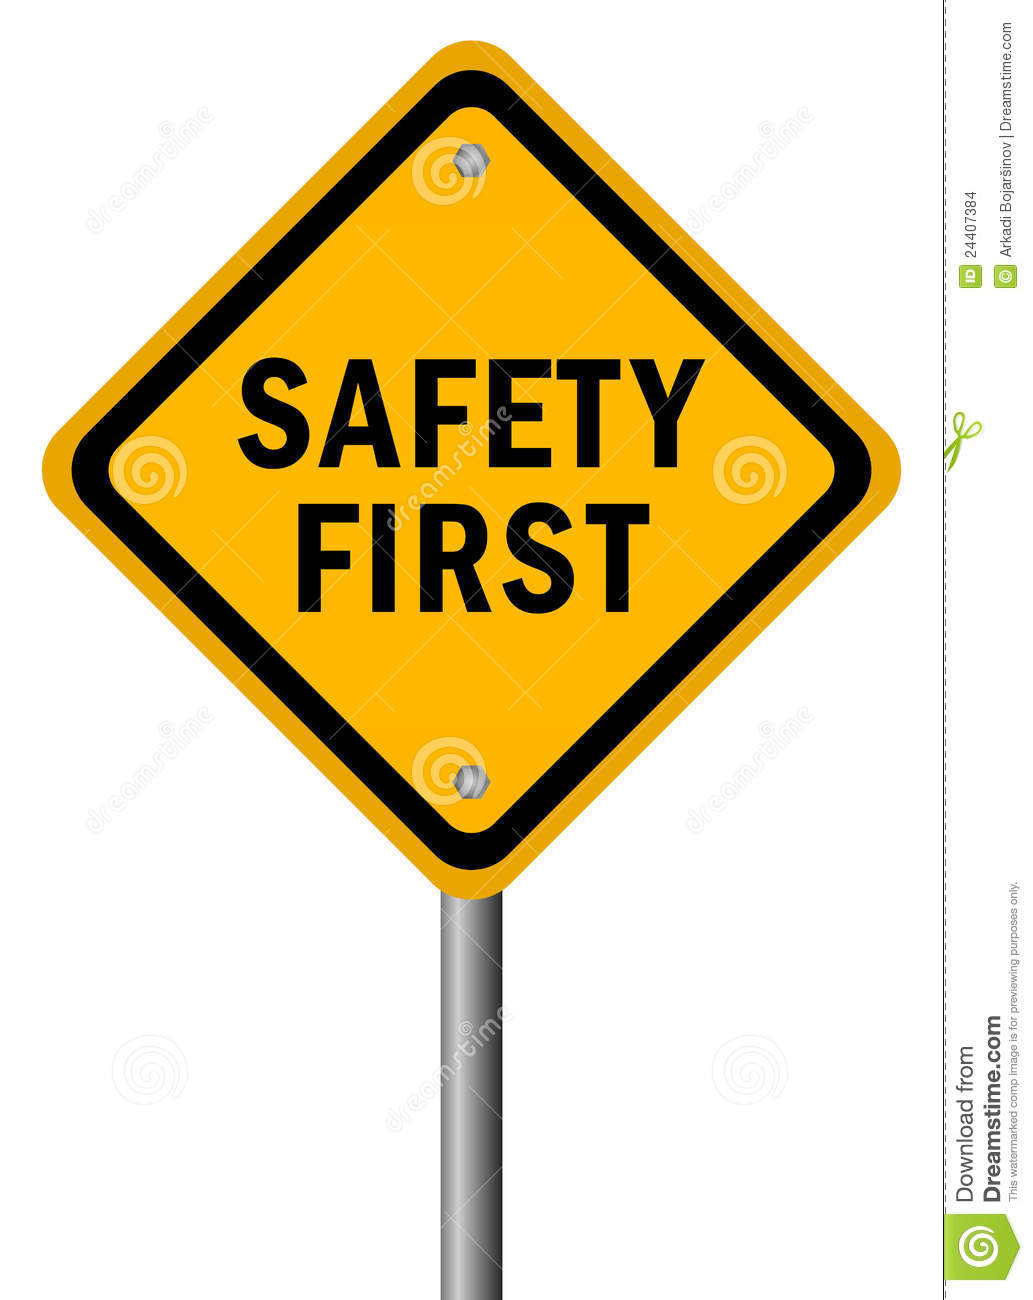 Cartoon safety signs clipart 